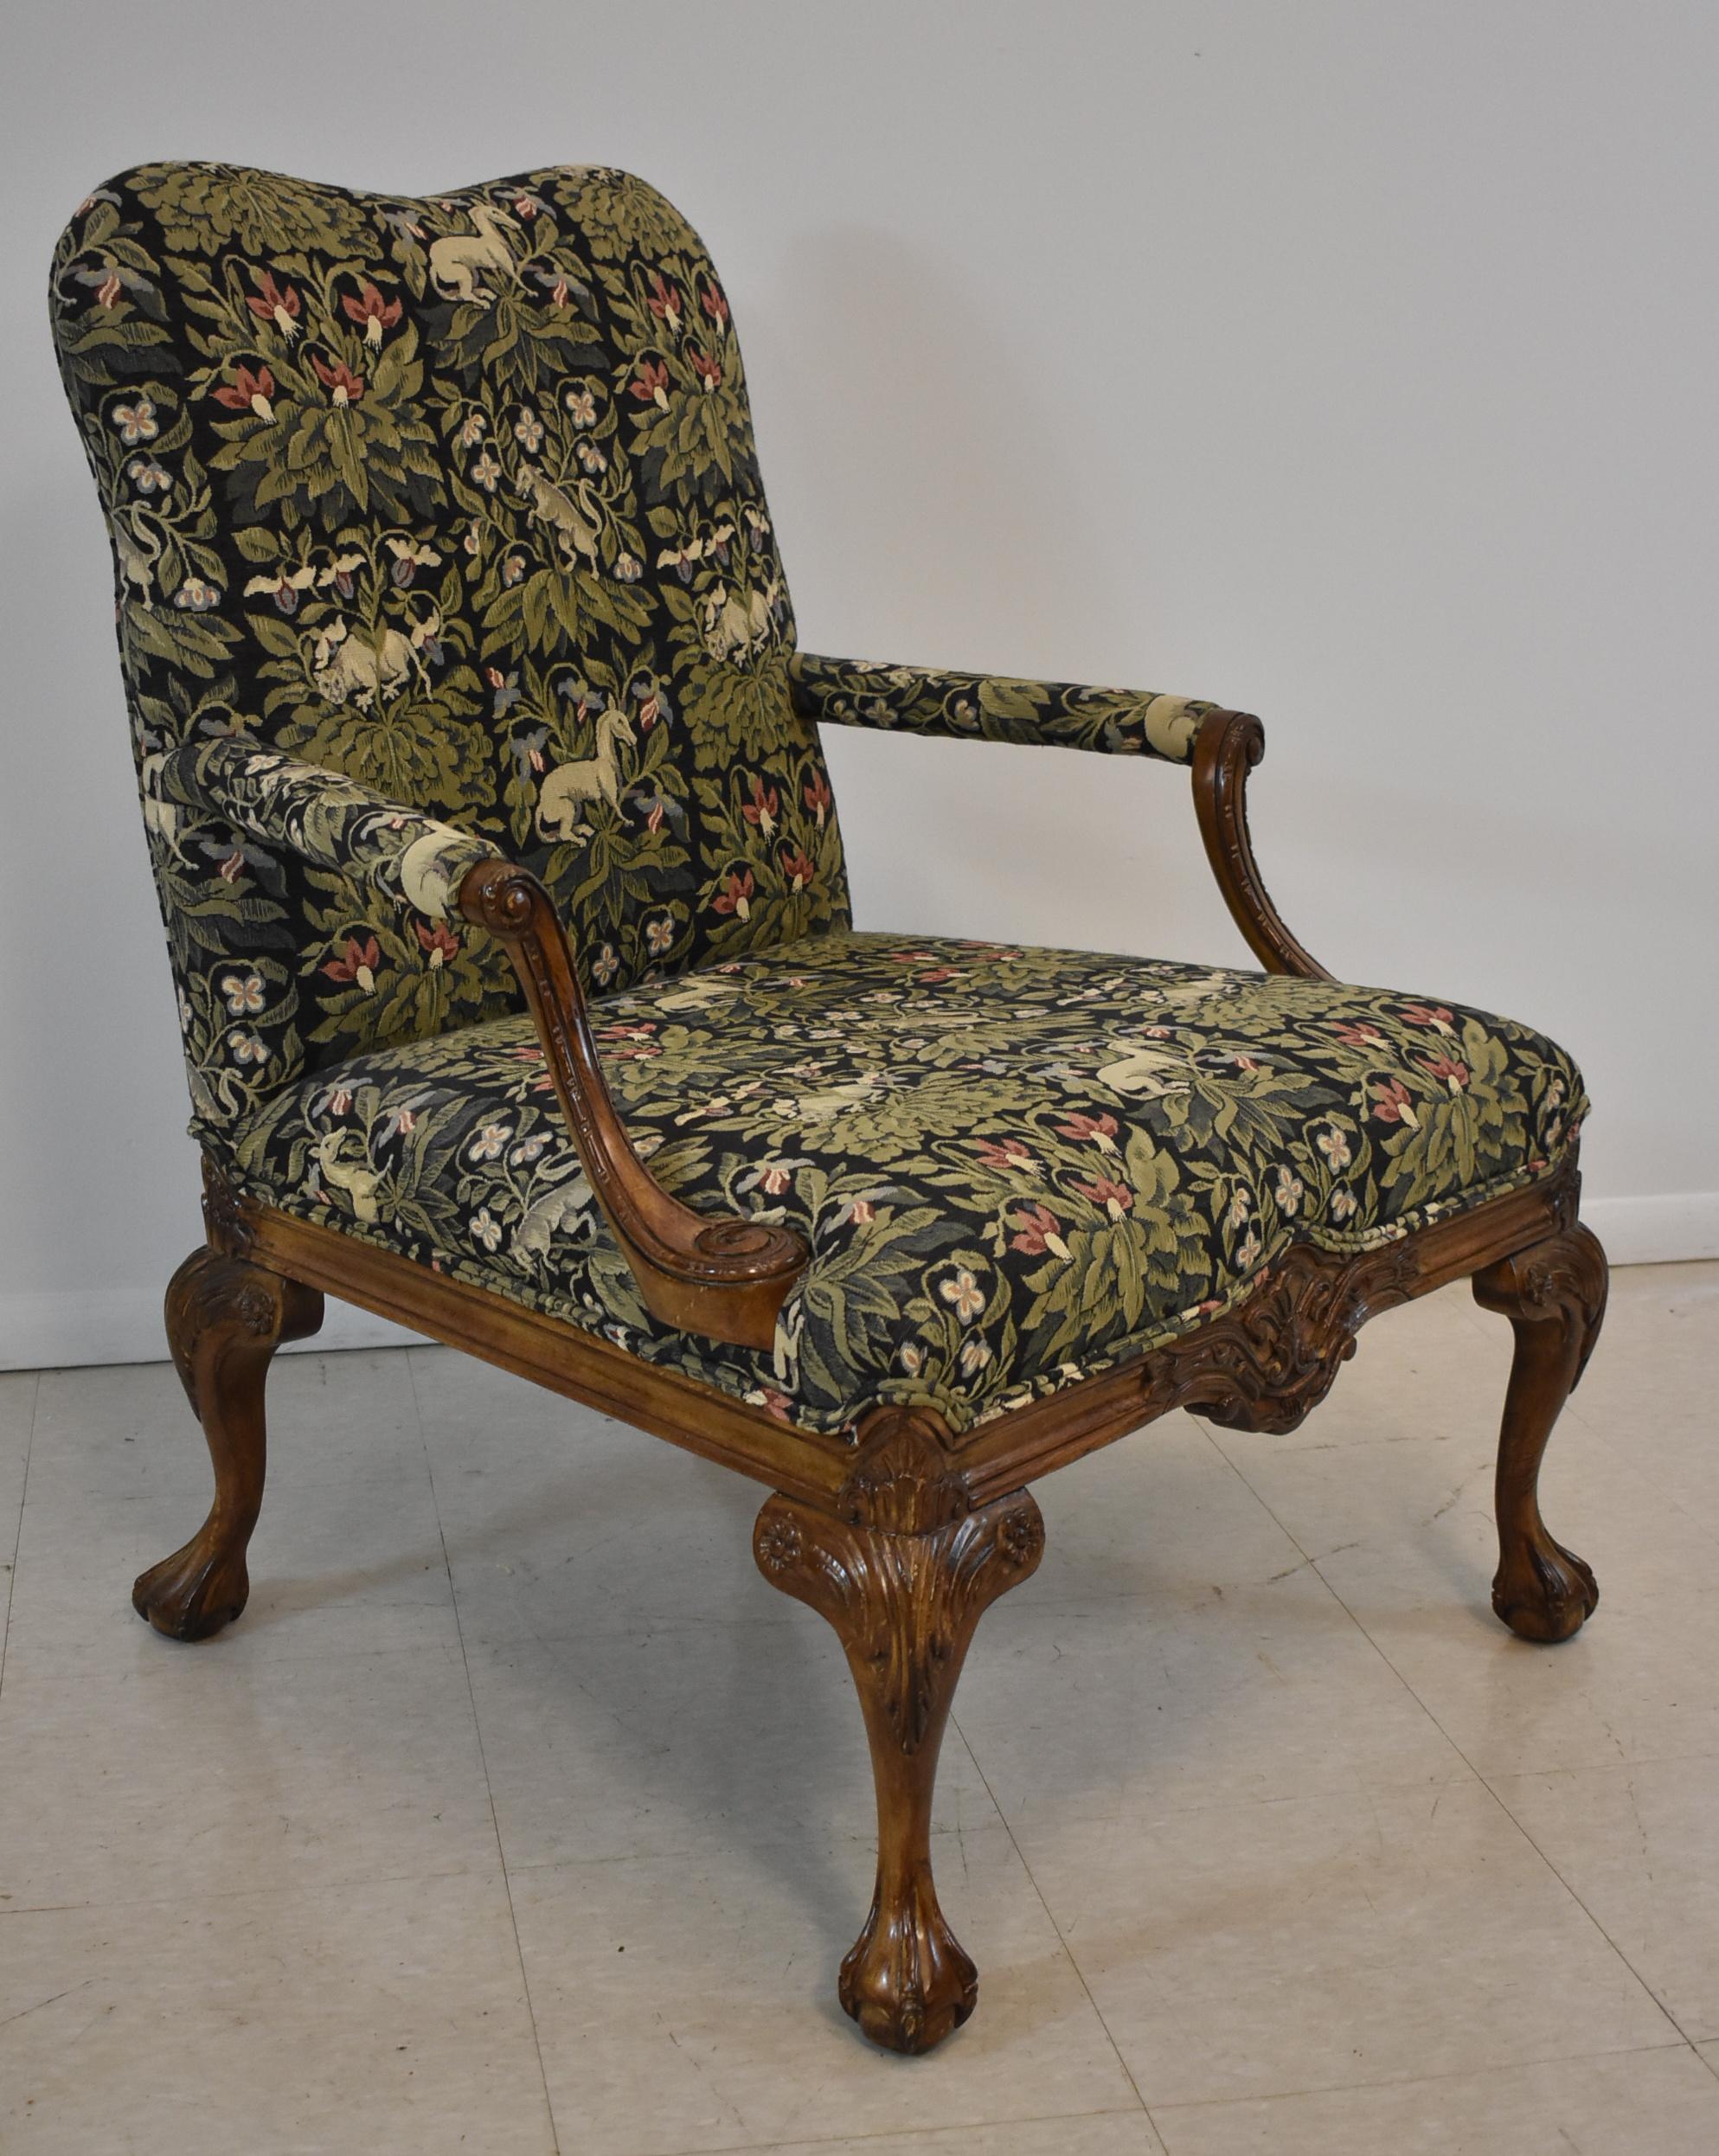 Italian style carved side chair by Sherrill Furniture Company. Chippendale legs with ball and claw feet. Tapestry fabric in black and green with animals in foliage.